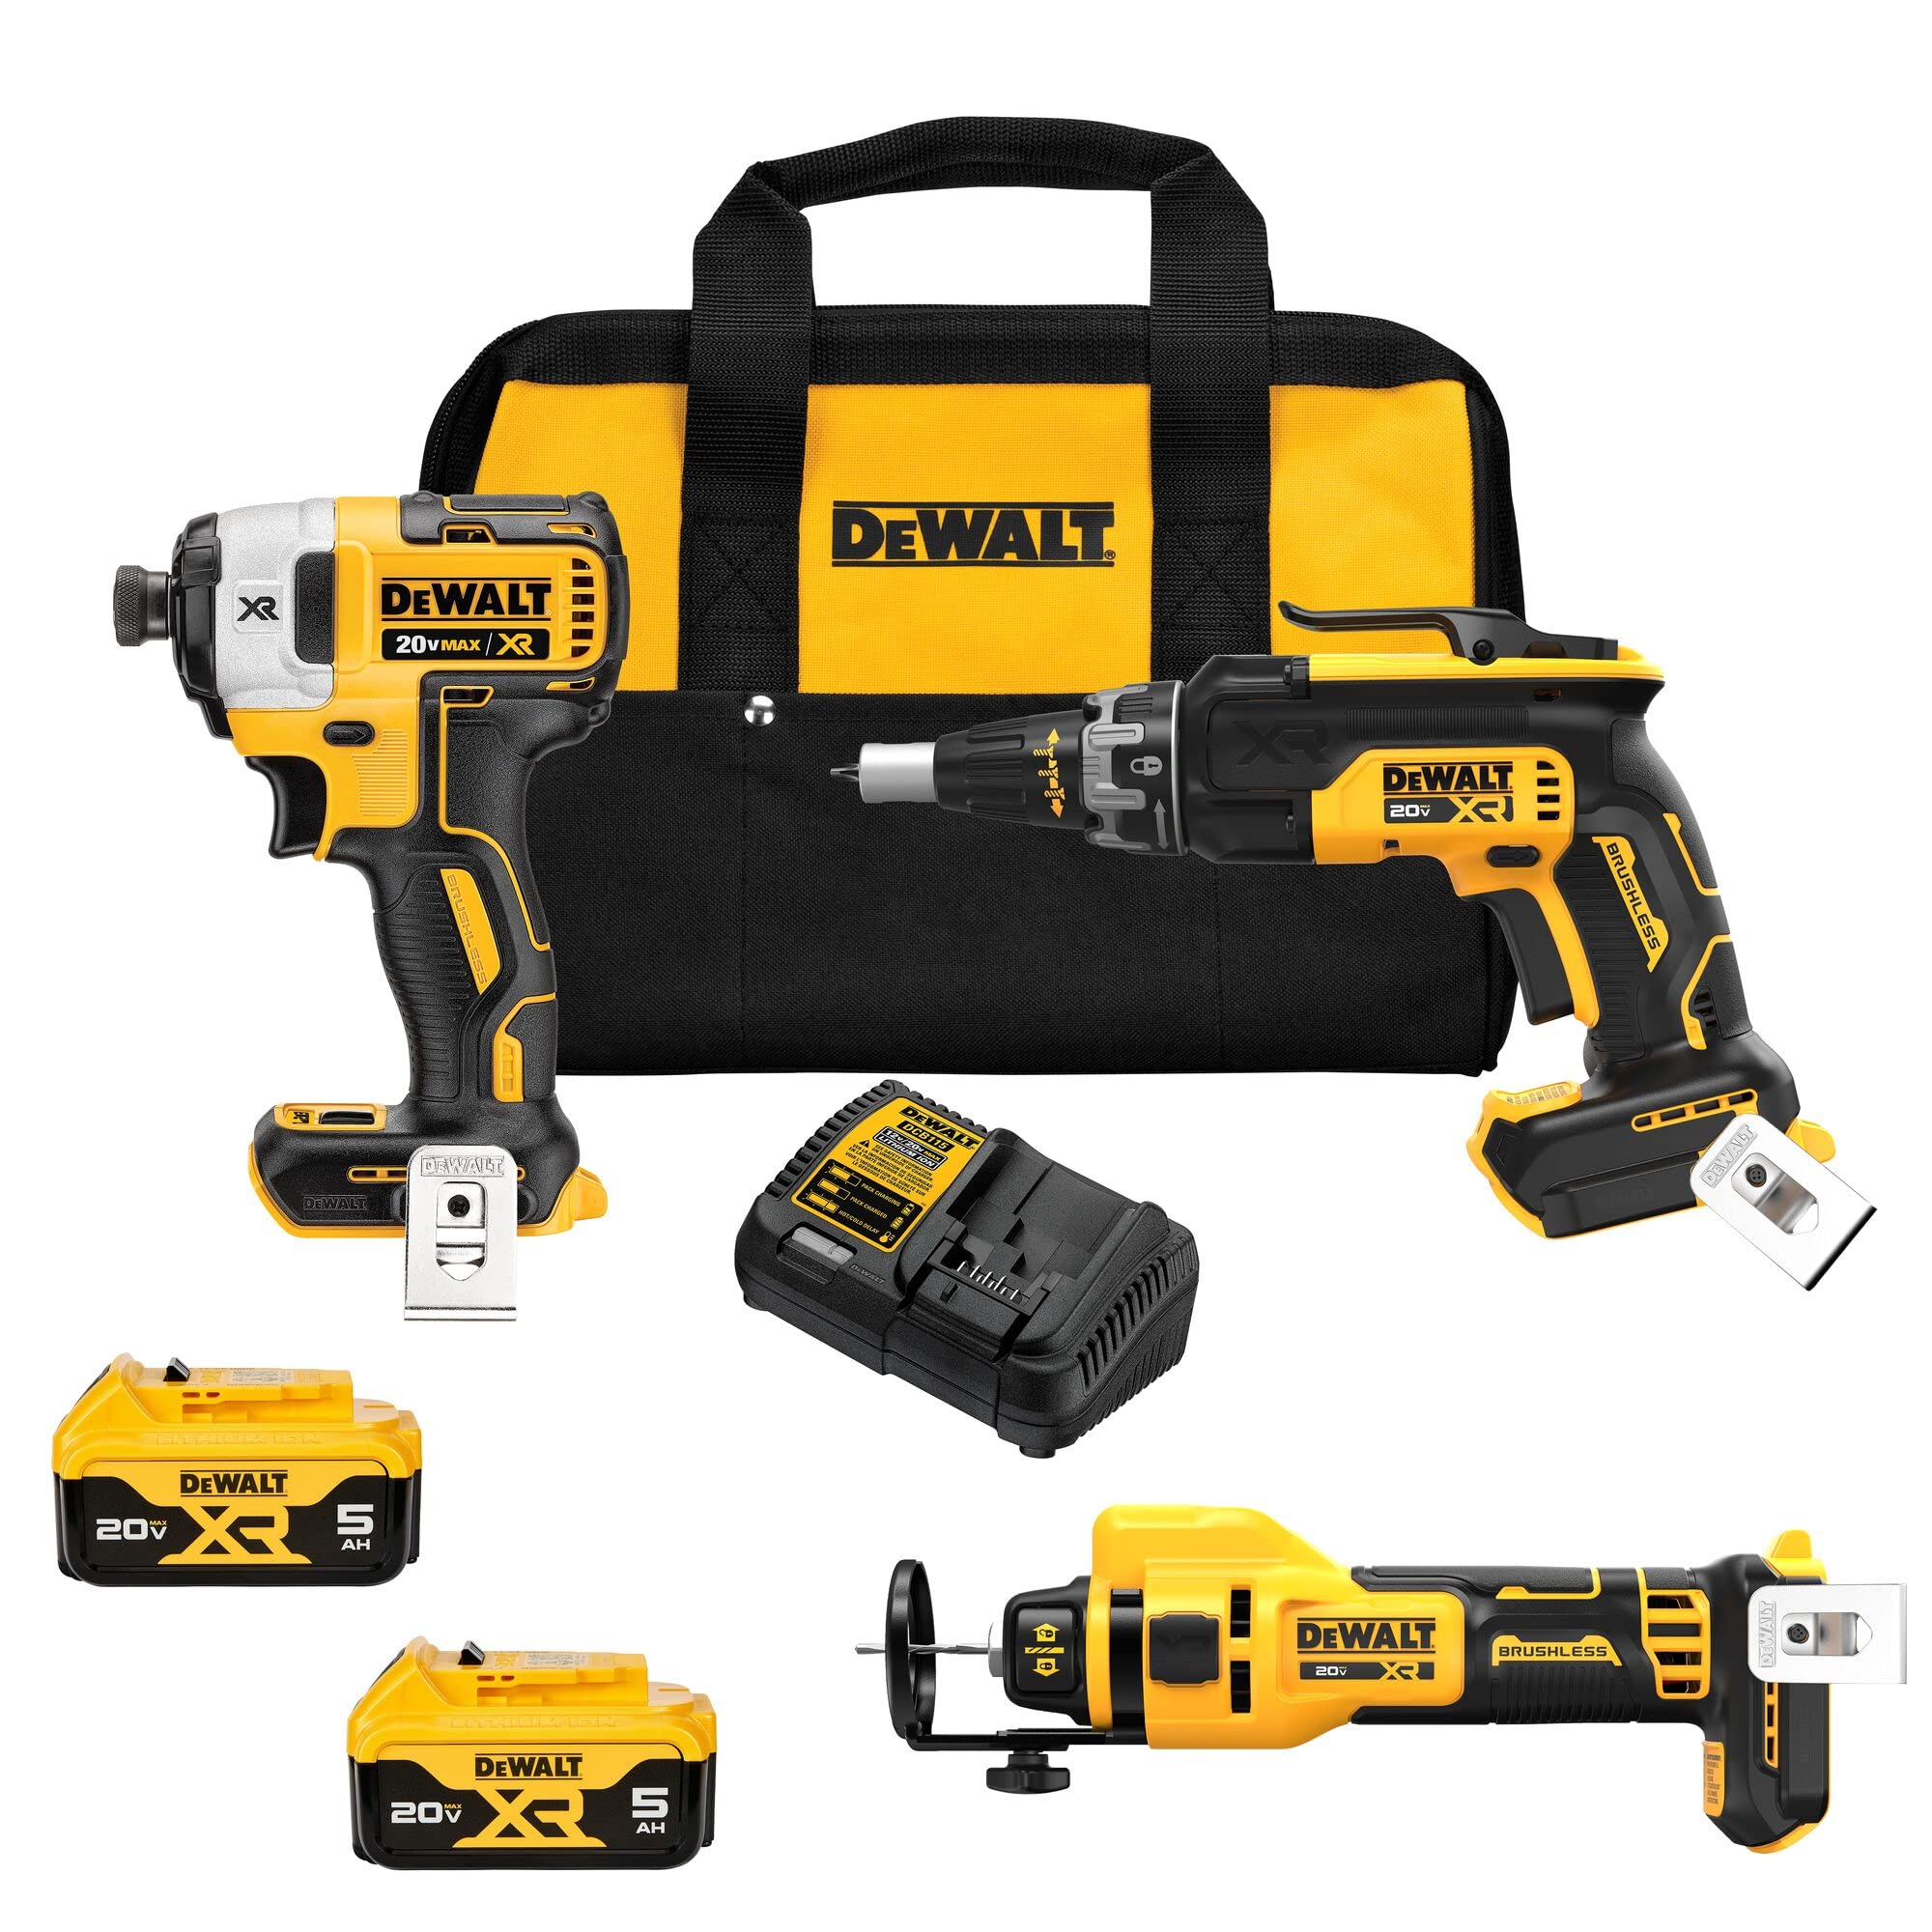 DEWALT 20V MAX XR Drywall Cutting Tool Combo Kit Cut Out Tool Drywall Screwgun Impact Driver with Batteries Charger and